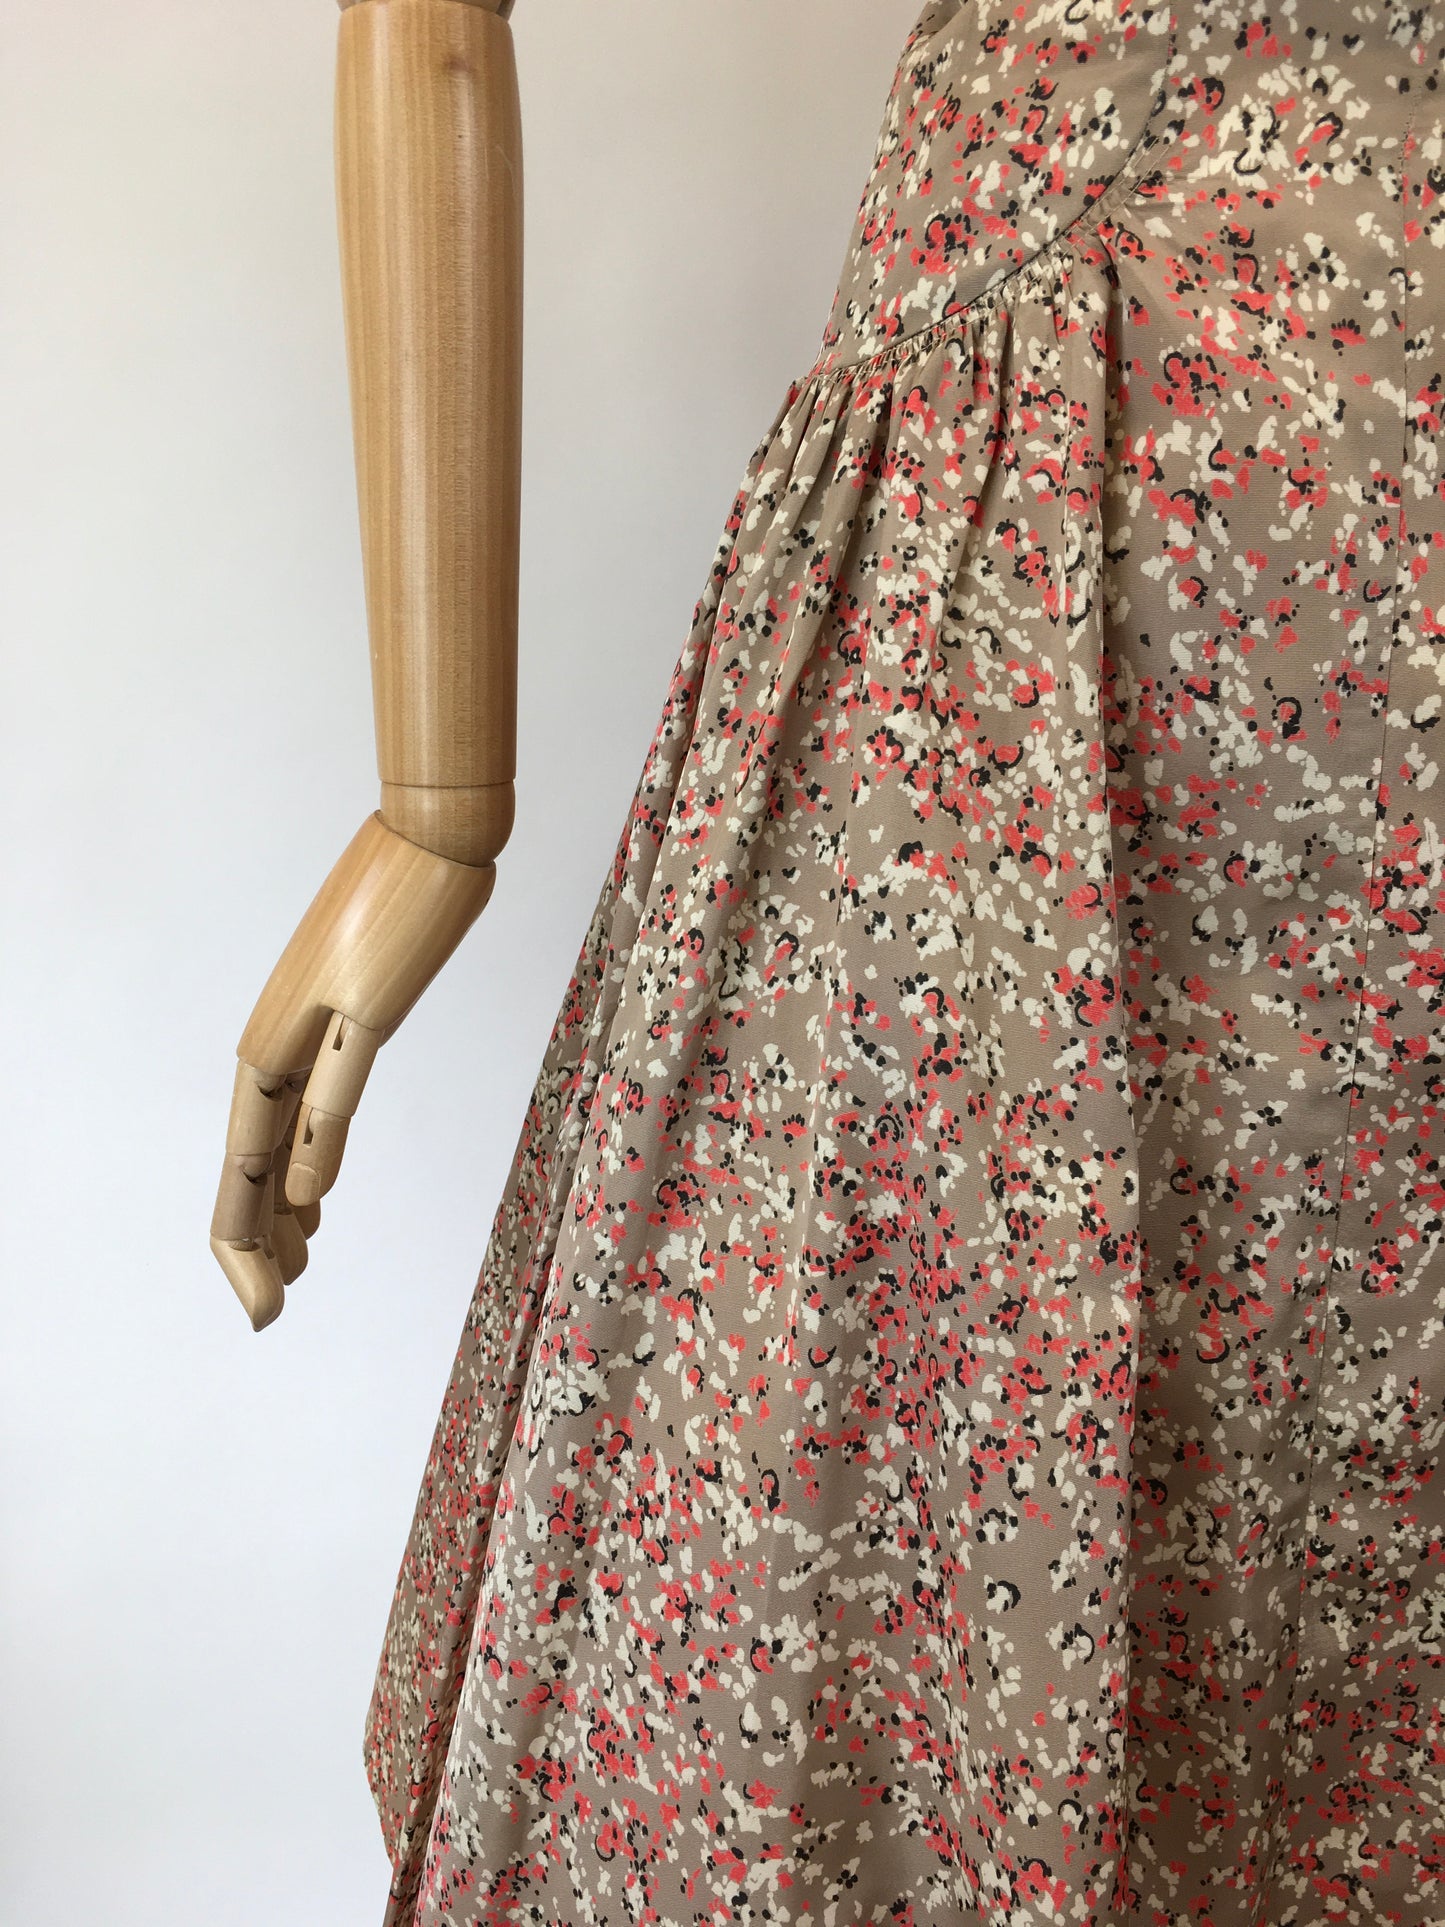 Original 1950’s Darling Evening Cocktail Dress - In A Beige, Fawn, Coral & Black Colourway